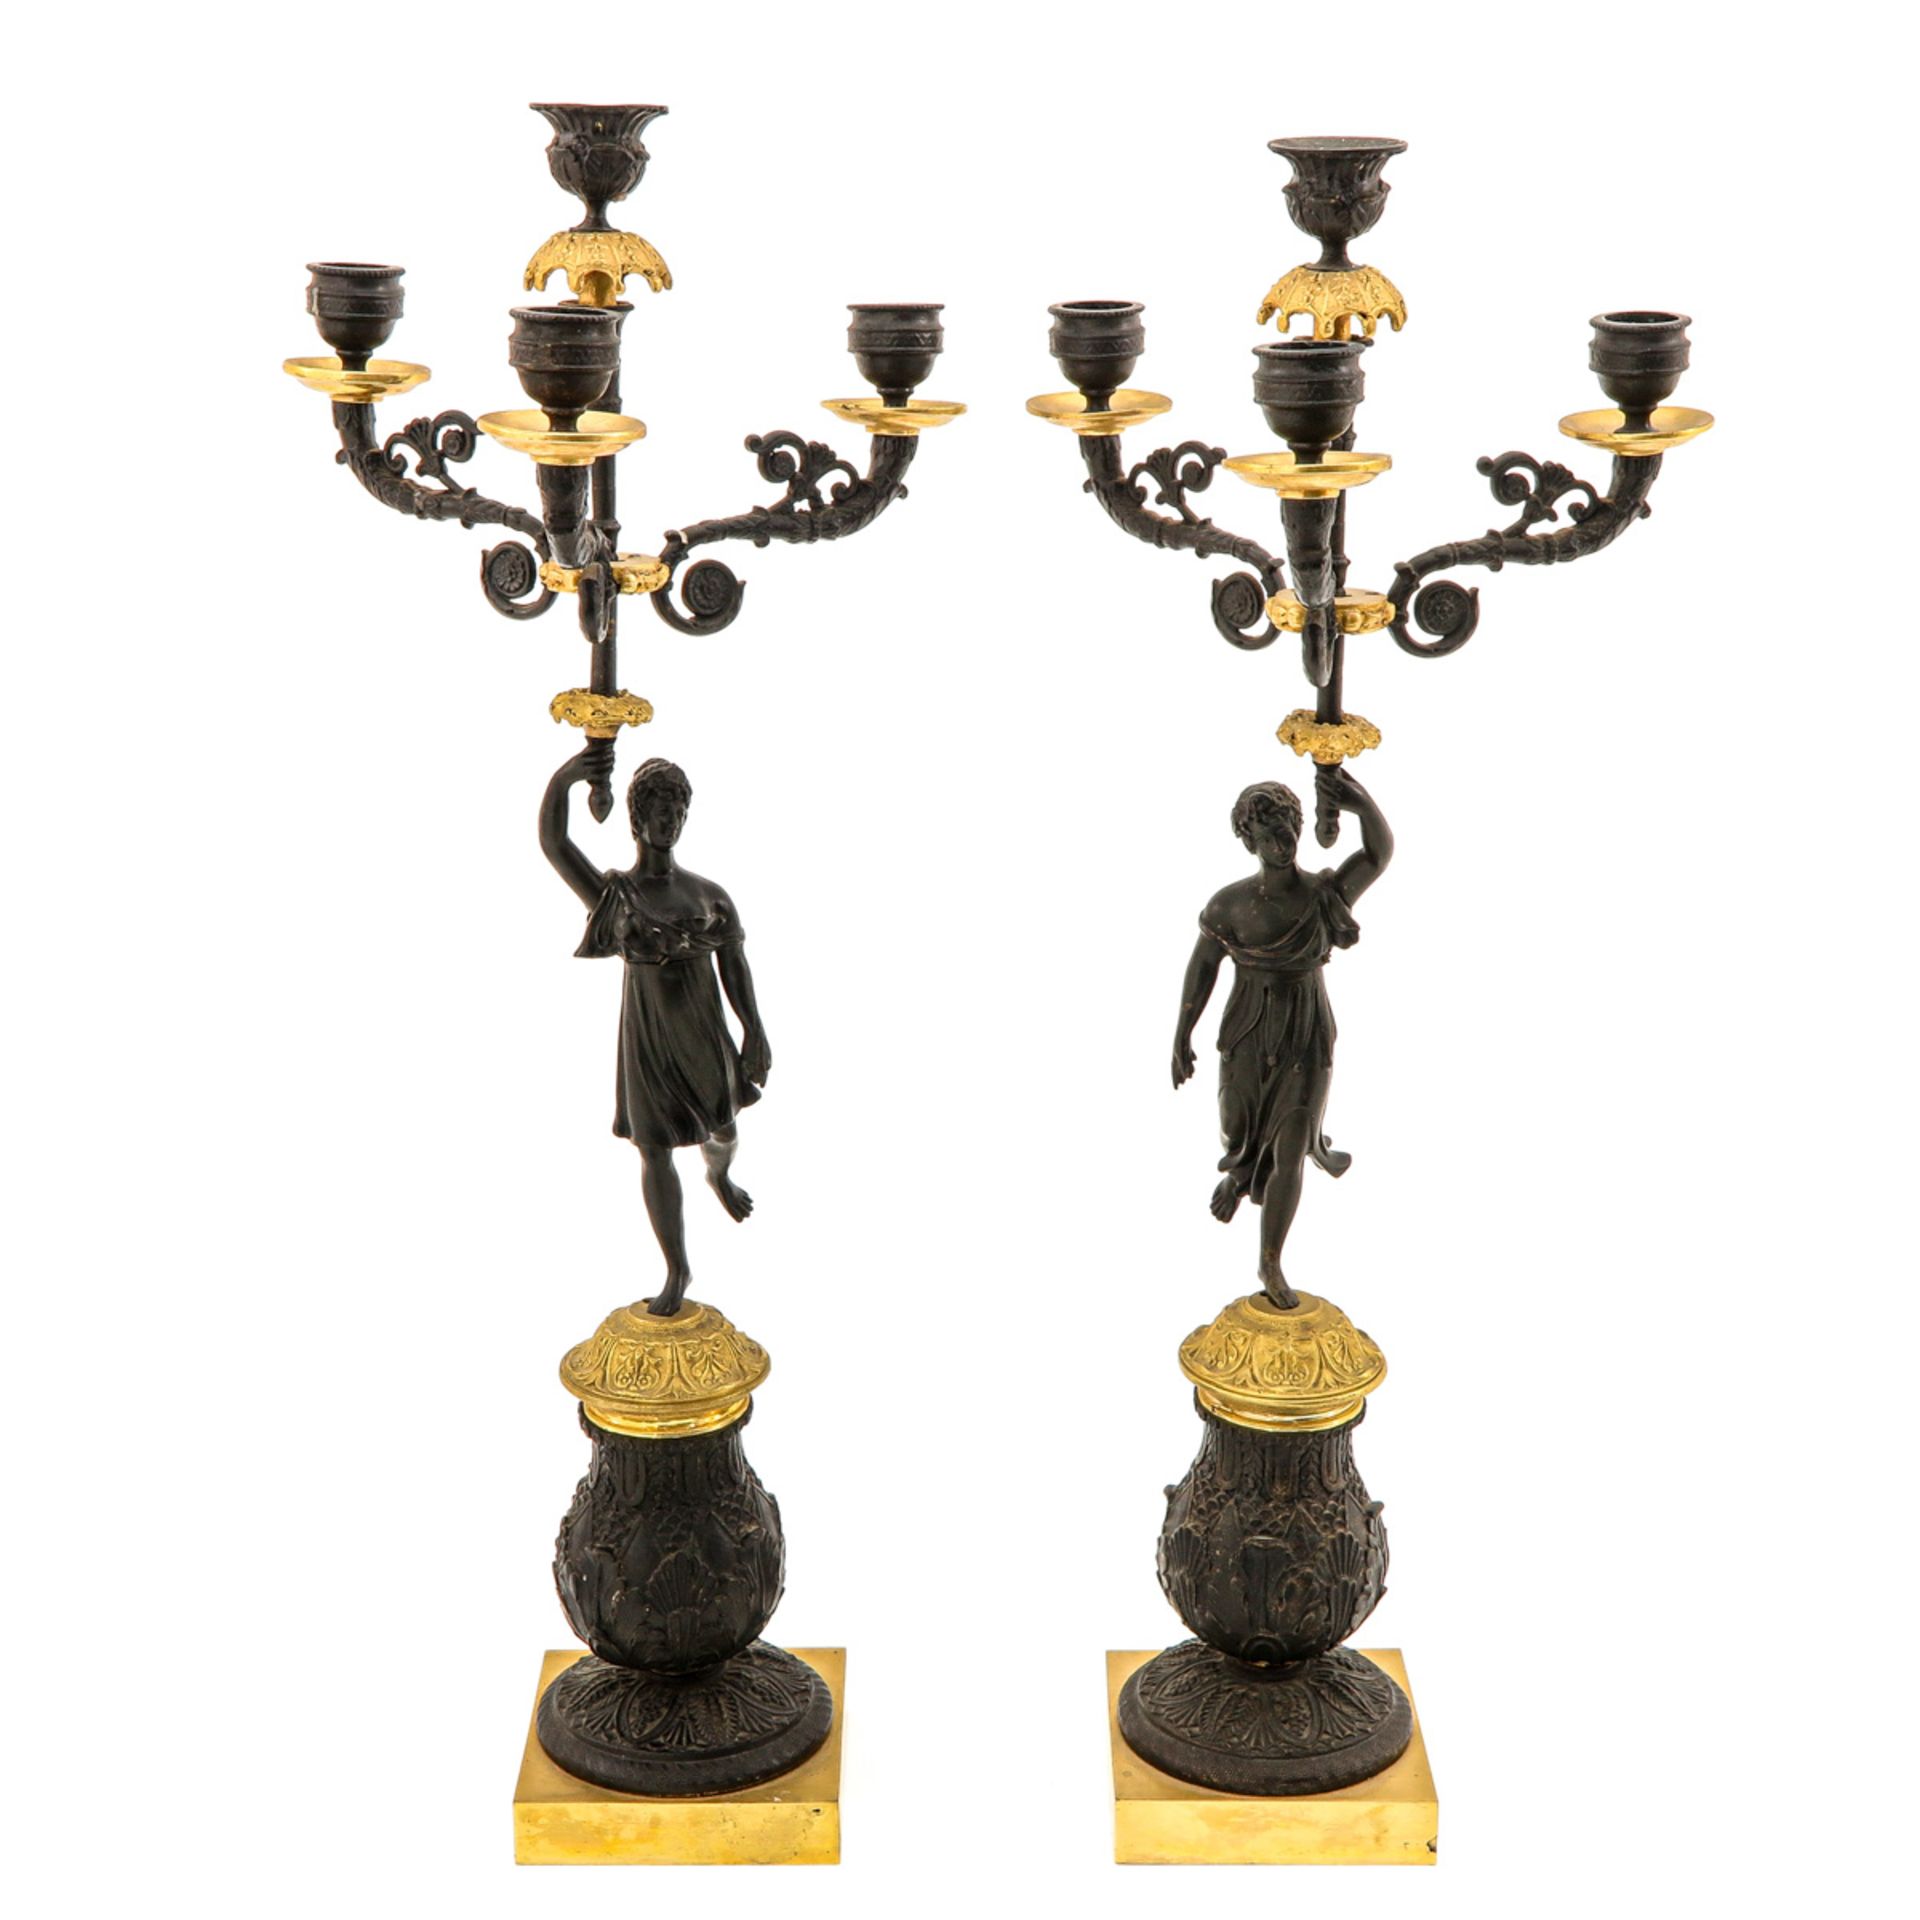 A Pair of 19th Century Candelsticks